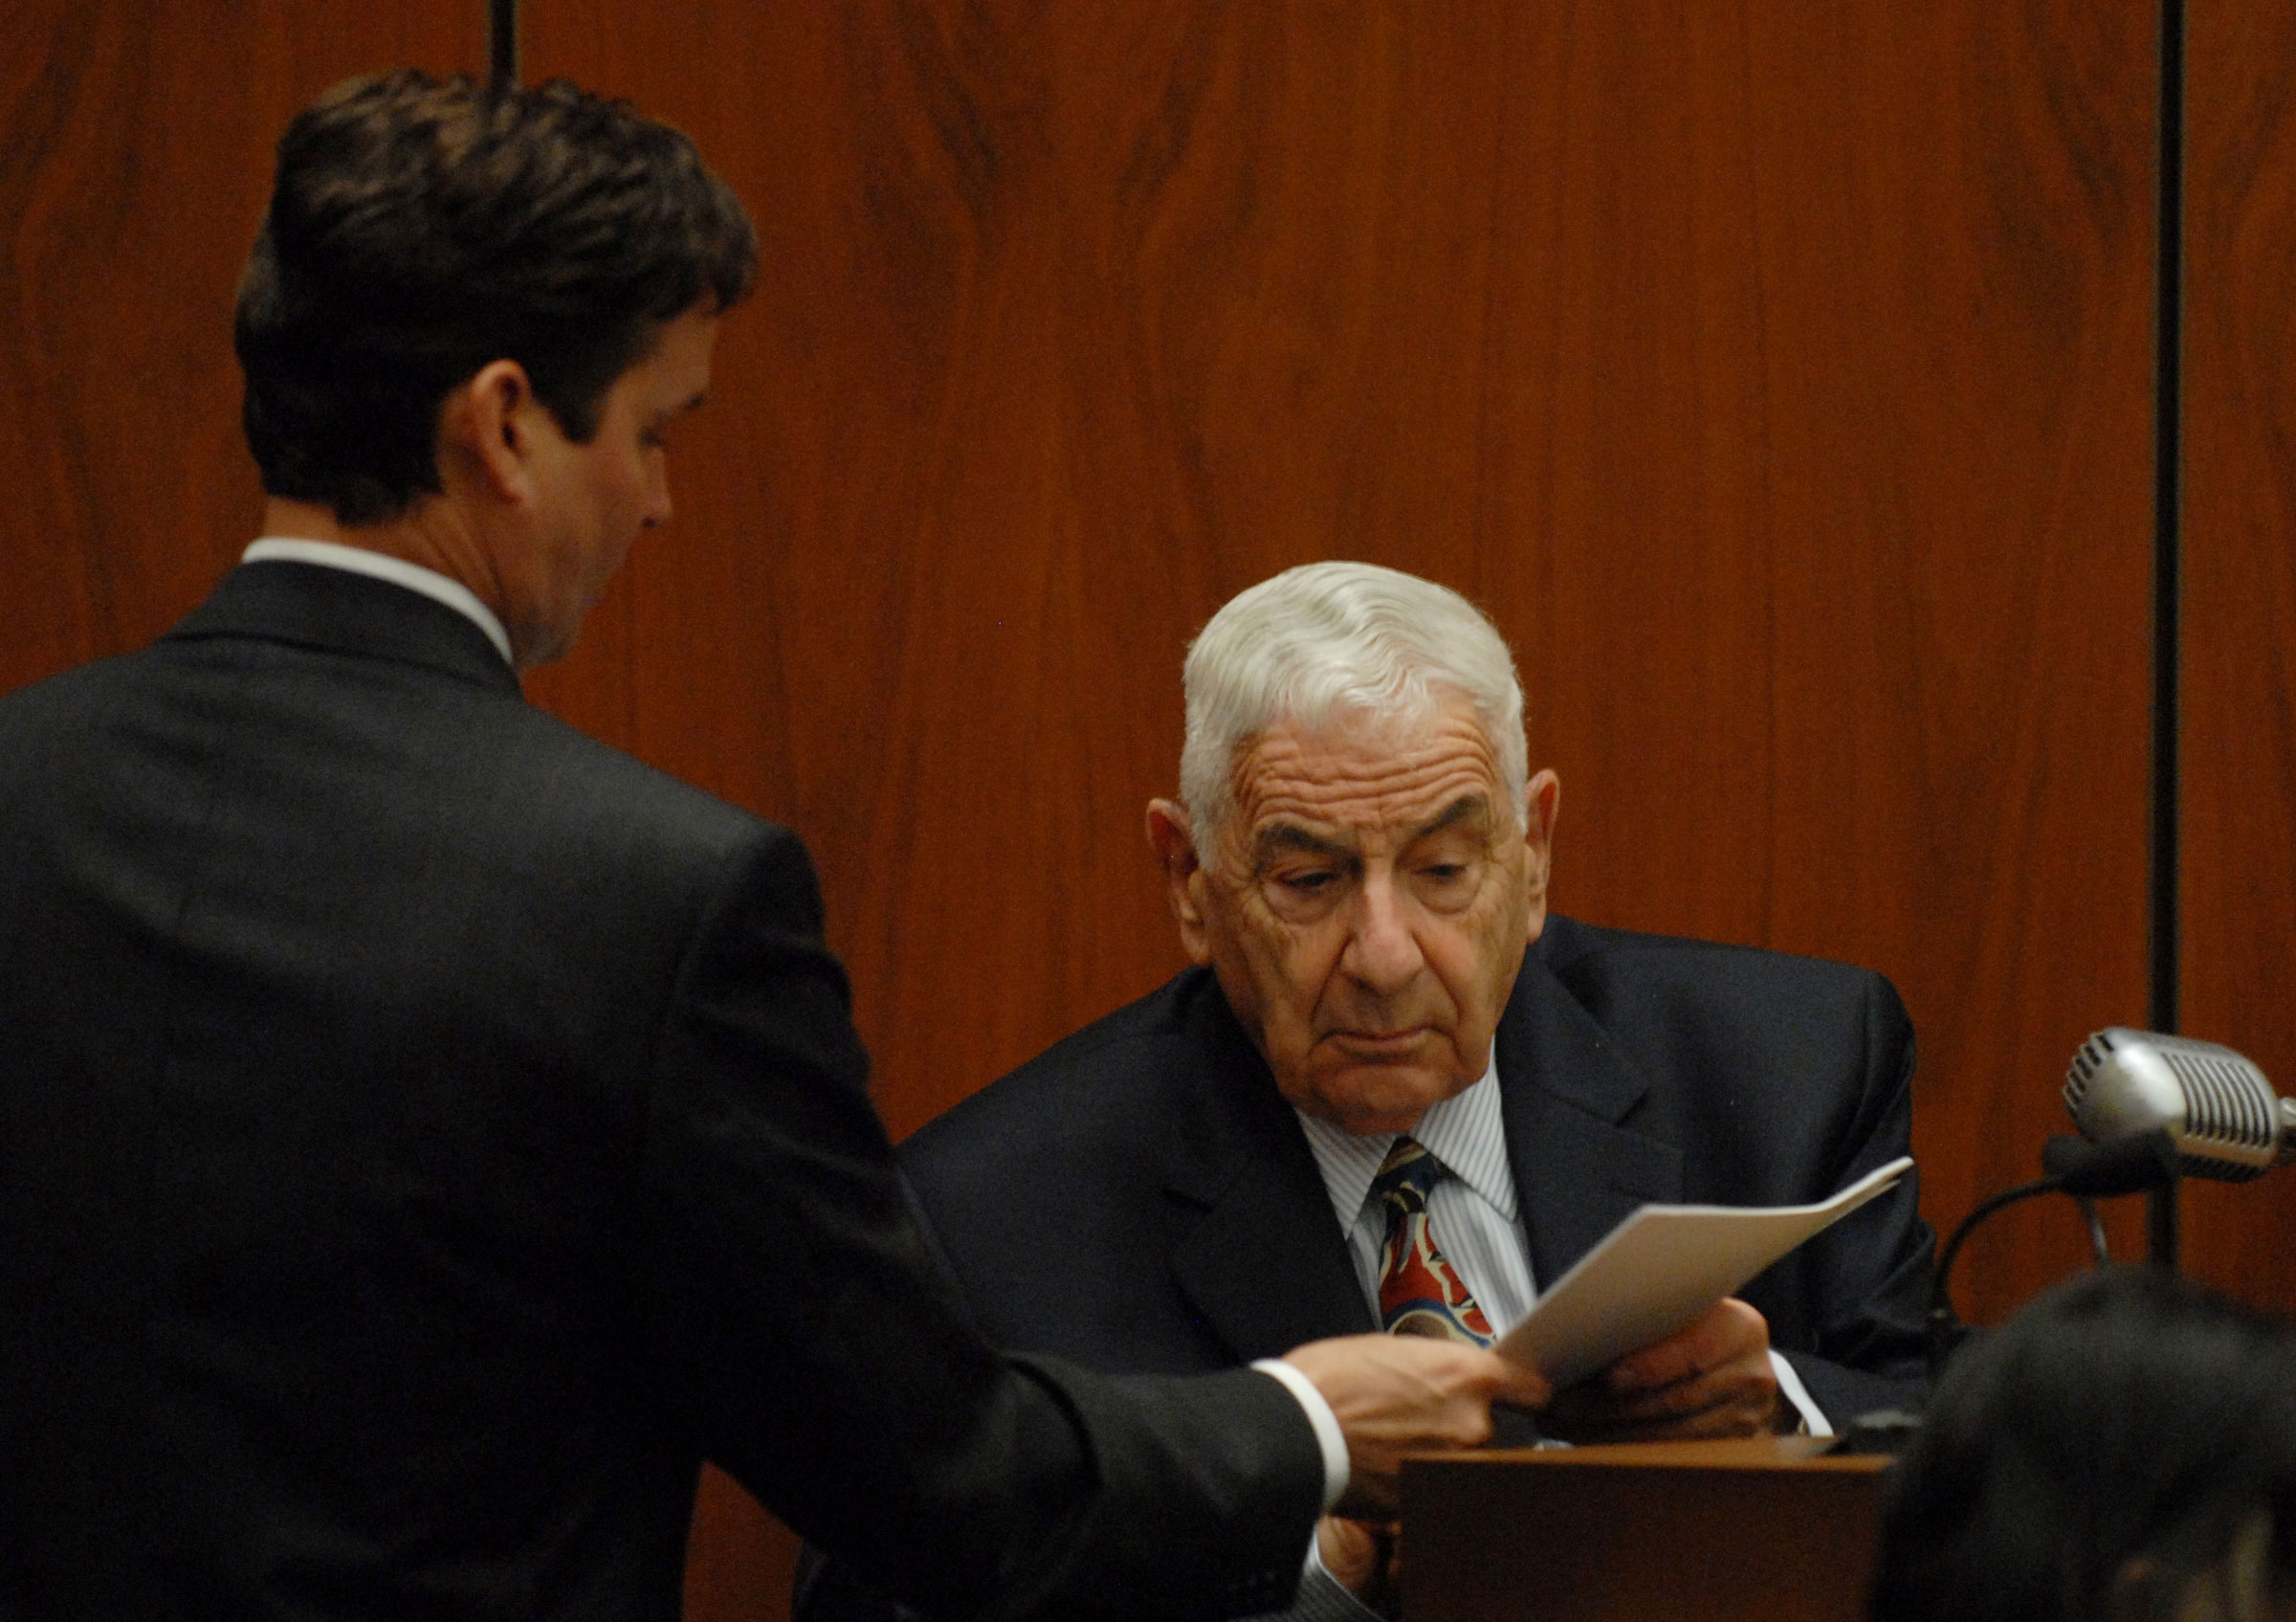 Prosecutor Alan Jackson cross examines defense witness Werner Spitz in the murder trial of music producer Phil Spector